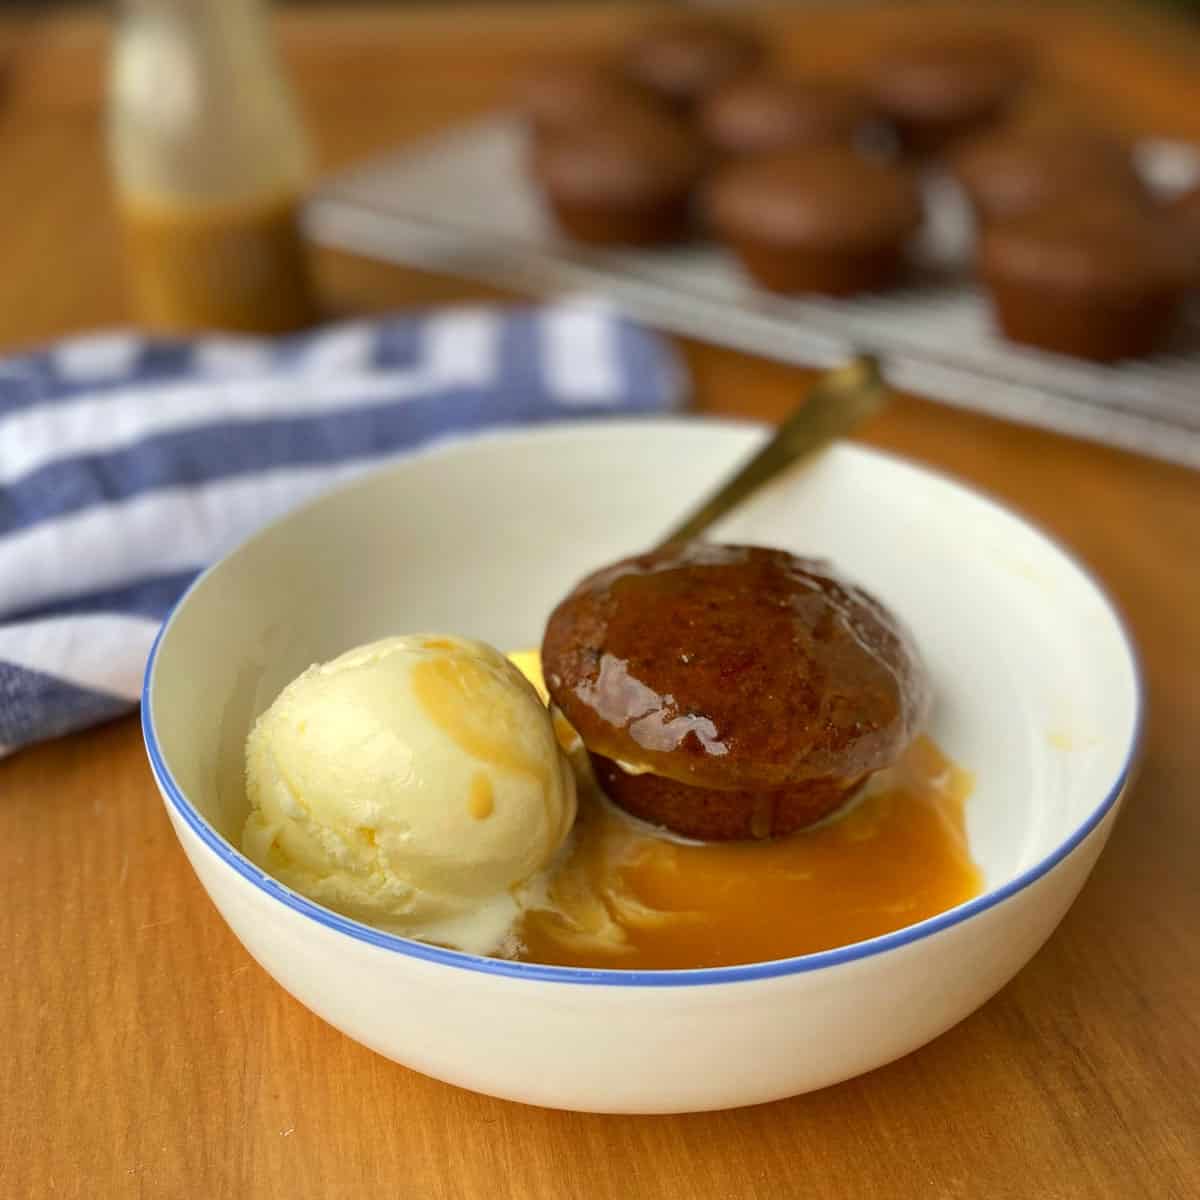 Mini sticky date pudding with icecream in a white bowl.